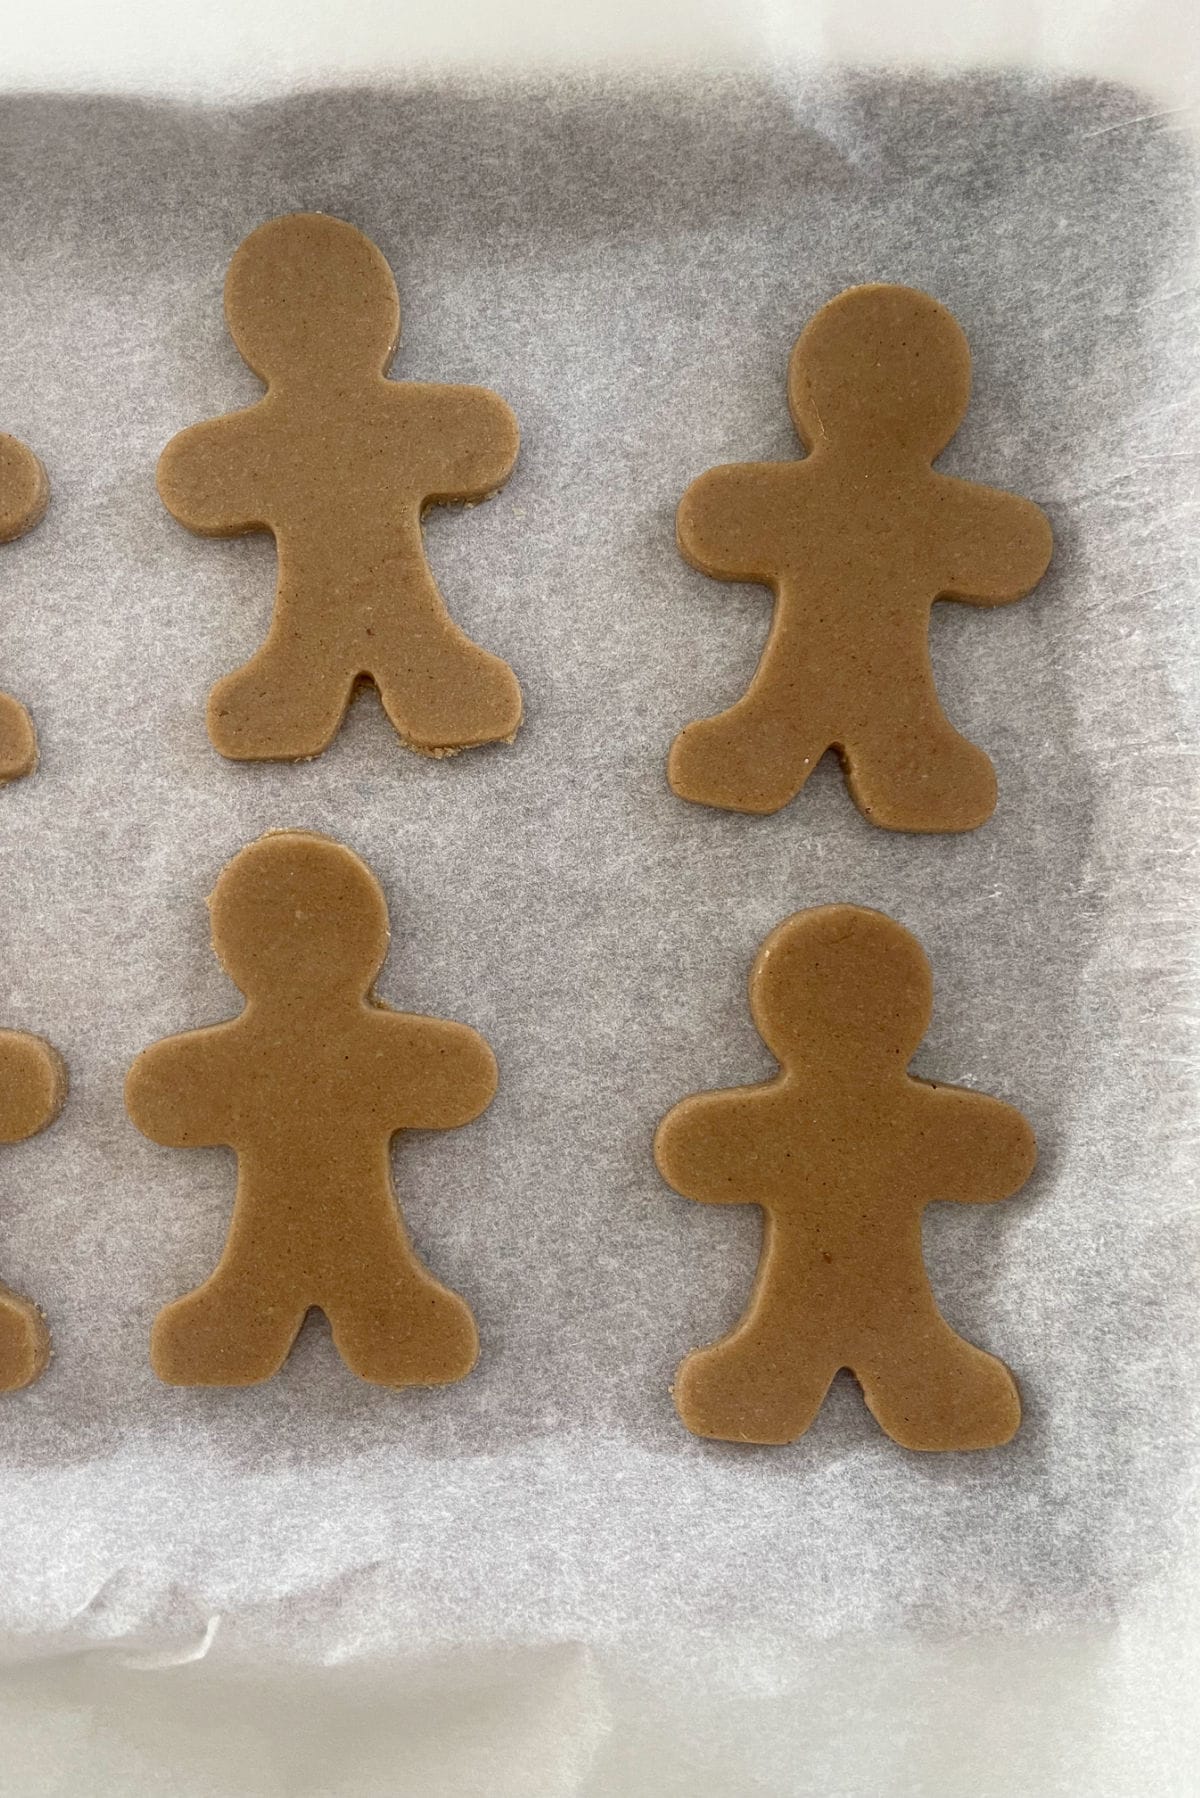 Gingerbread people on a baking tray lined with baking paper ready to go into the oven.